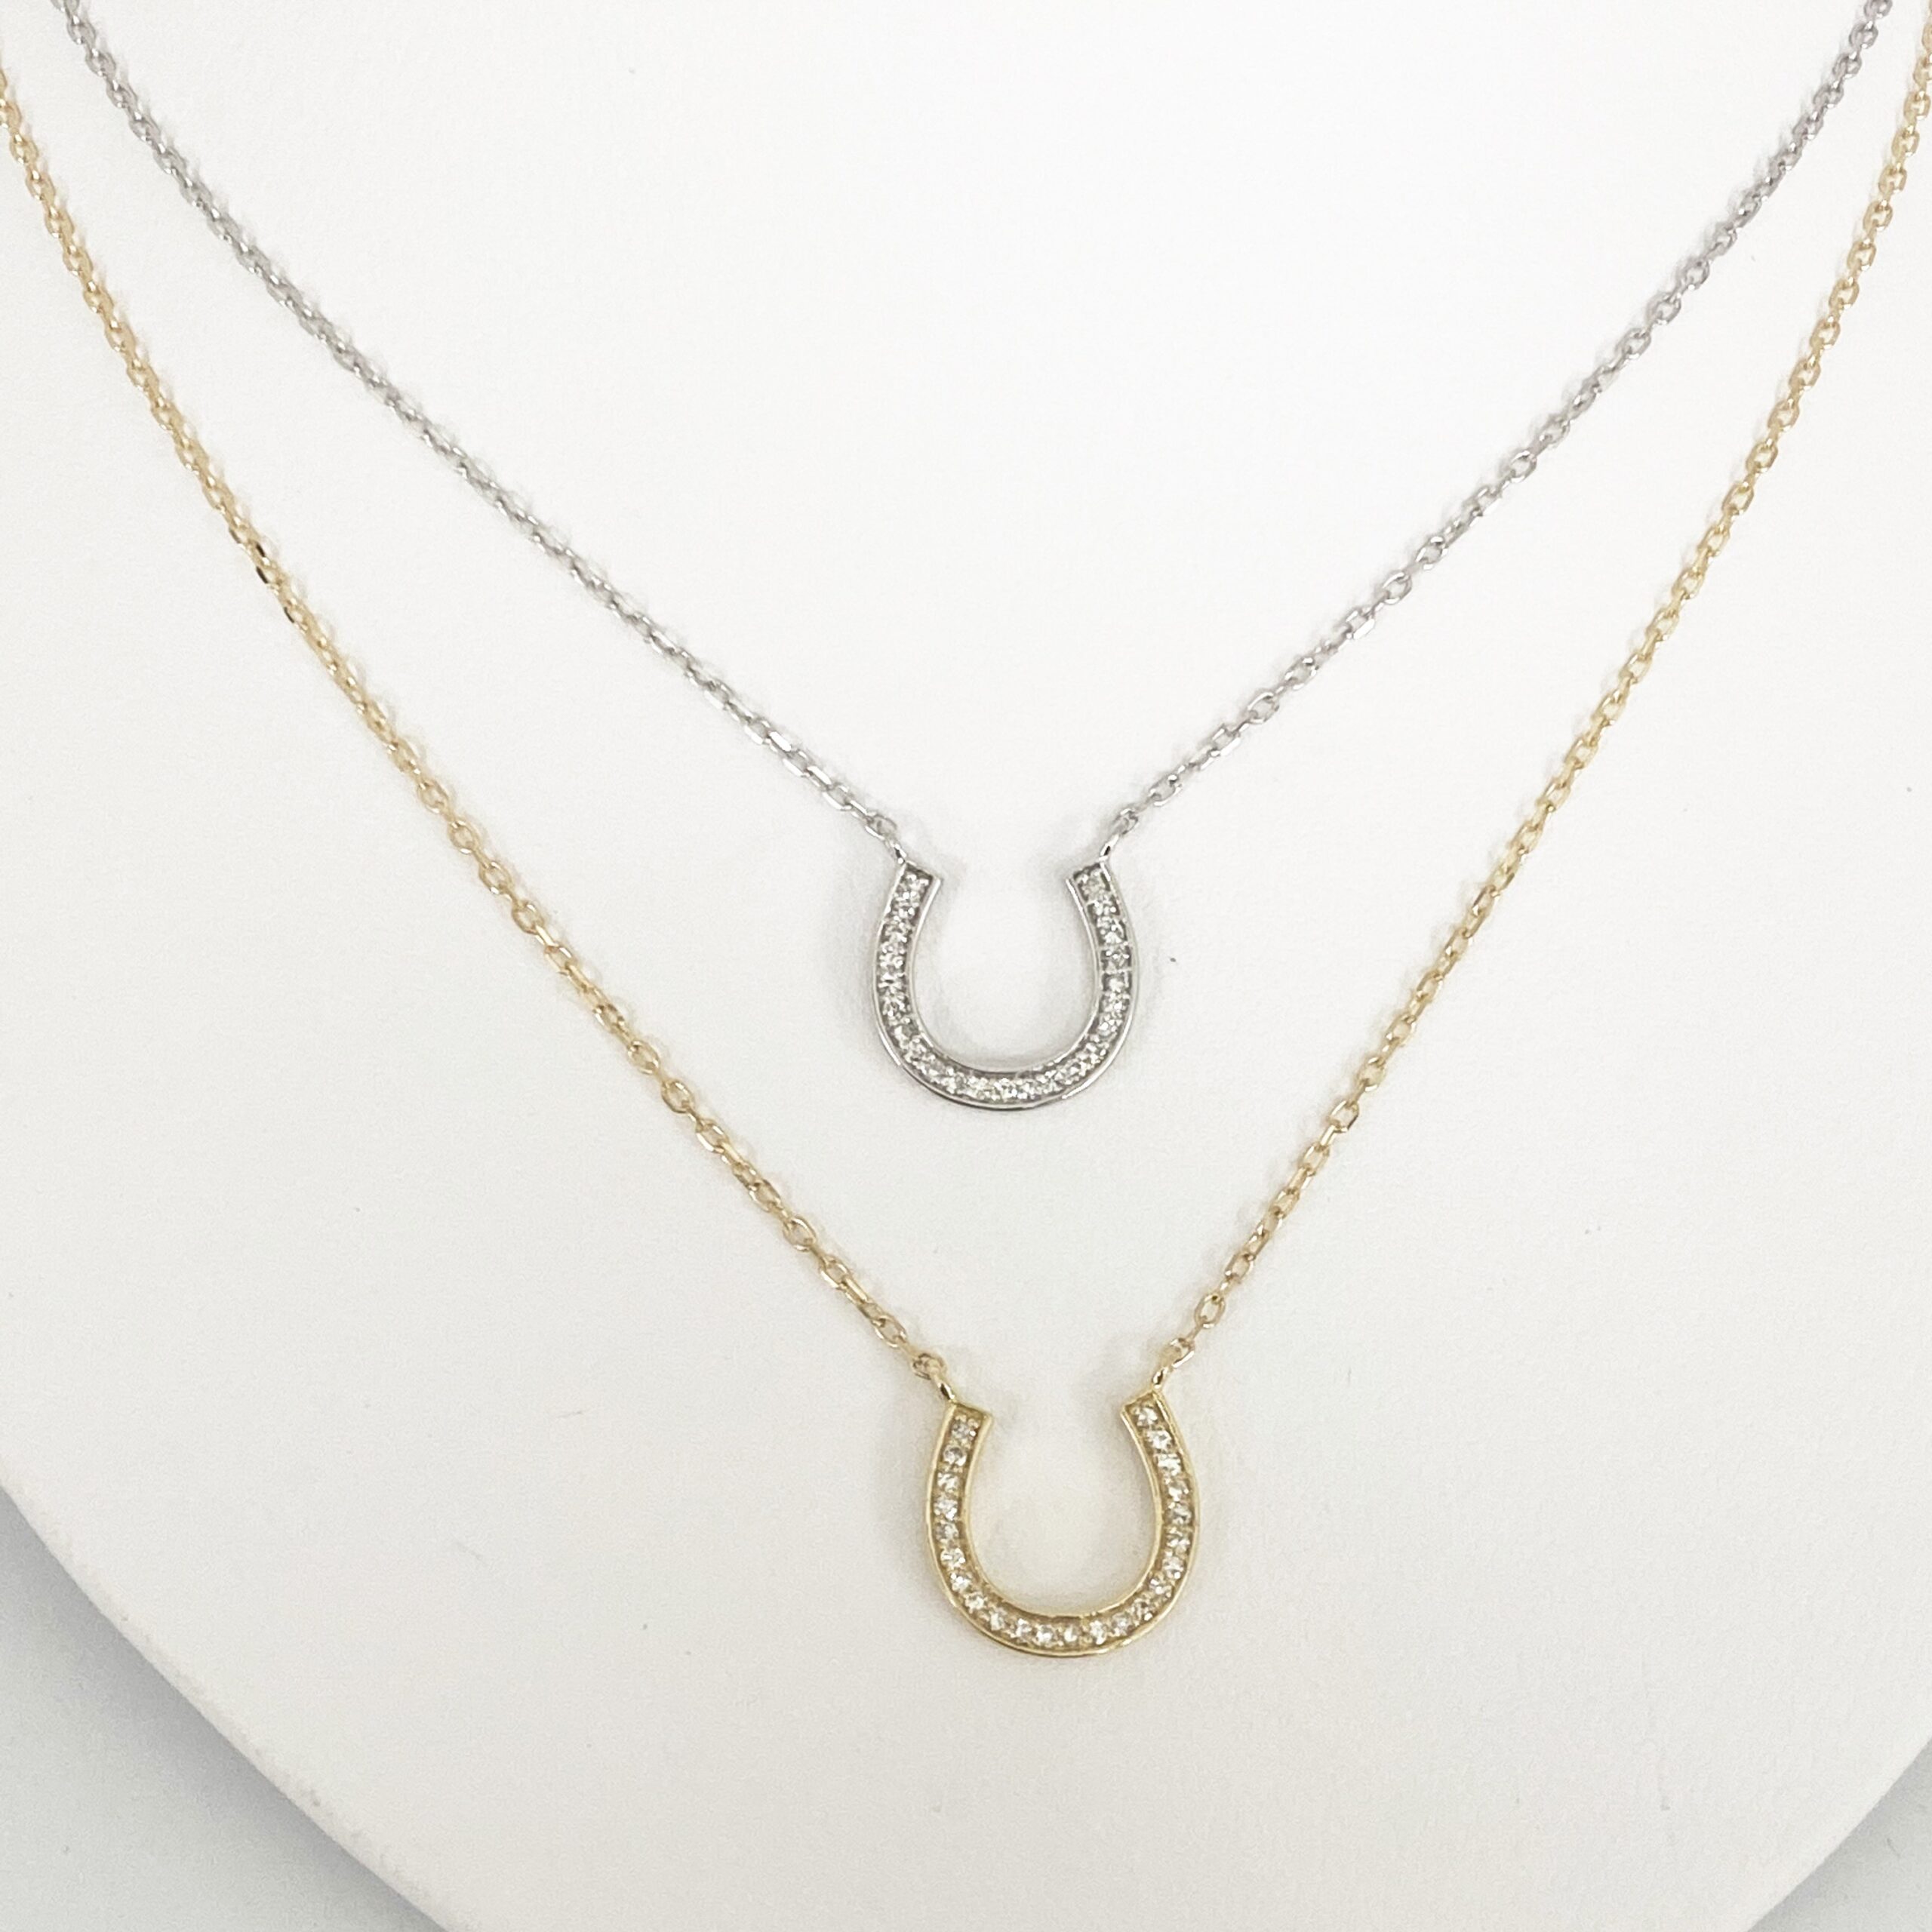 Equestrian Jewelry White Gold and Diamond Horseshoe Necklace 50 NKHS673DI -  Churchwell's Jewelers